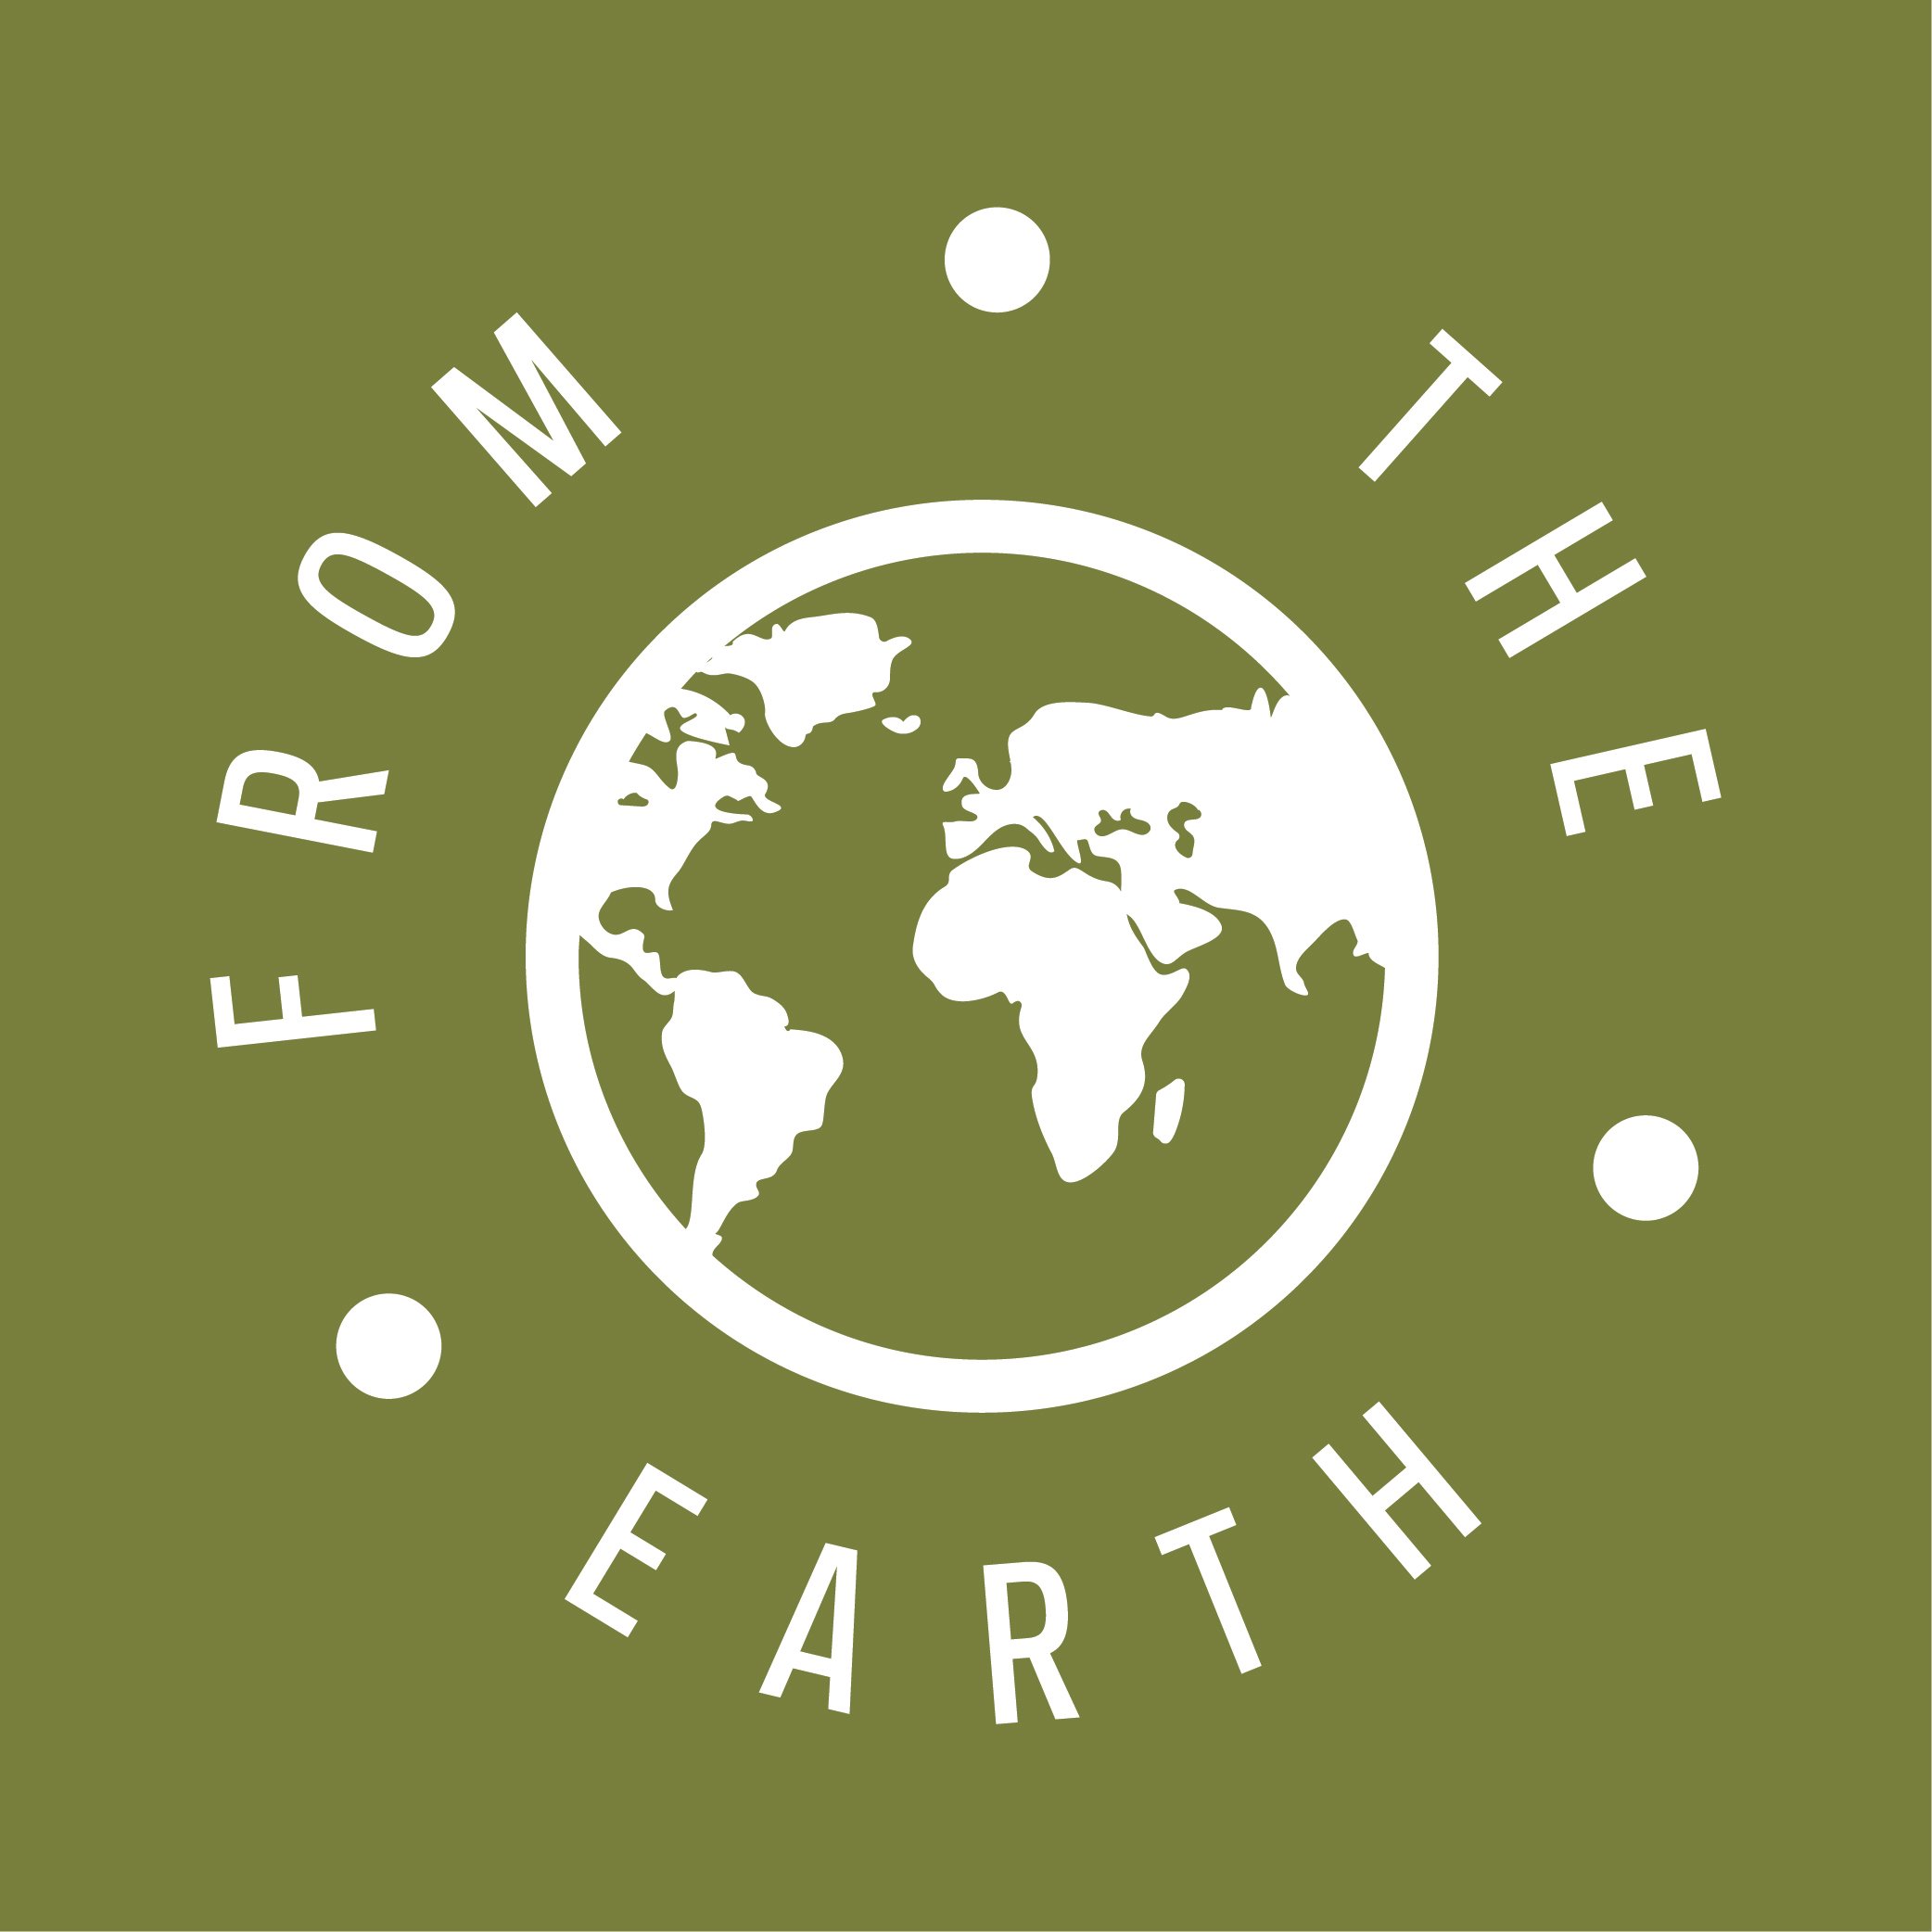 From The Earth Port Hueneme logo